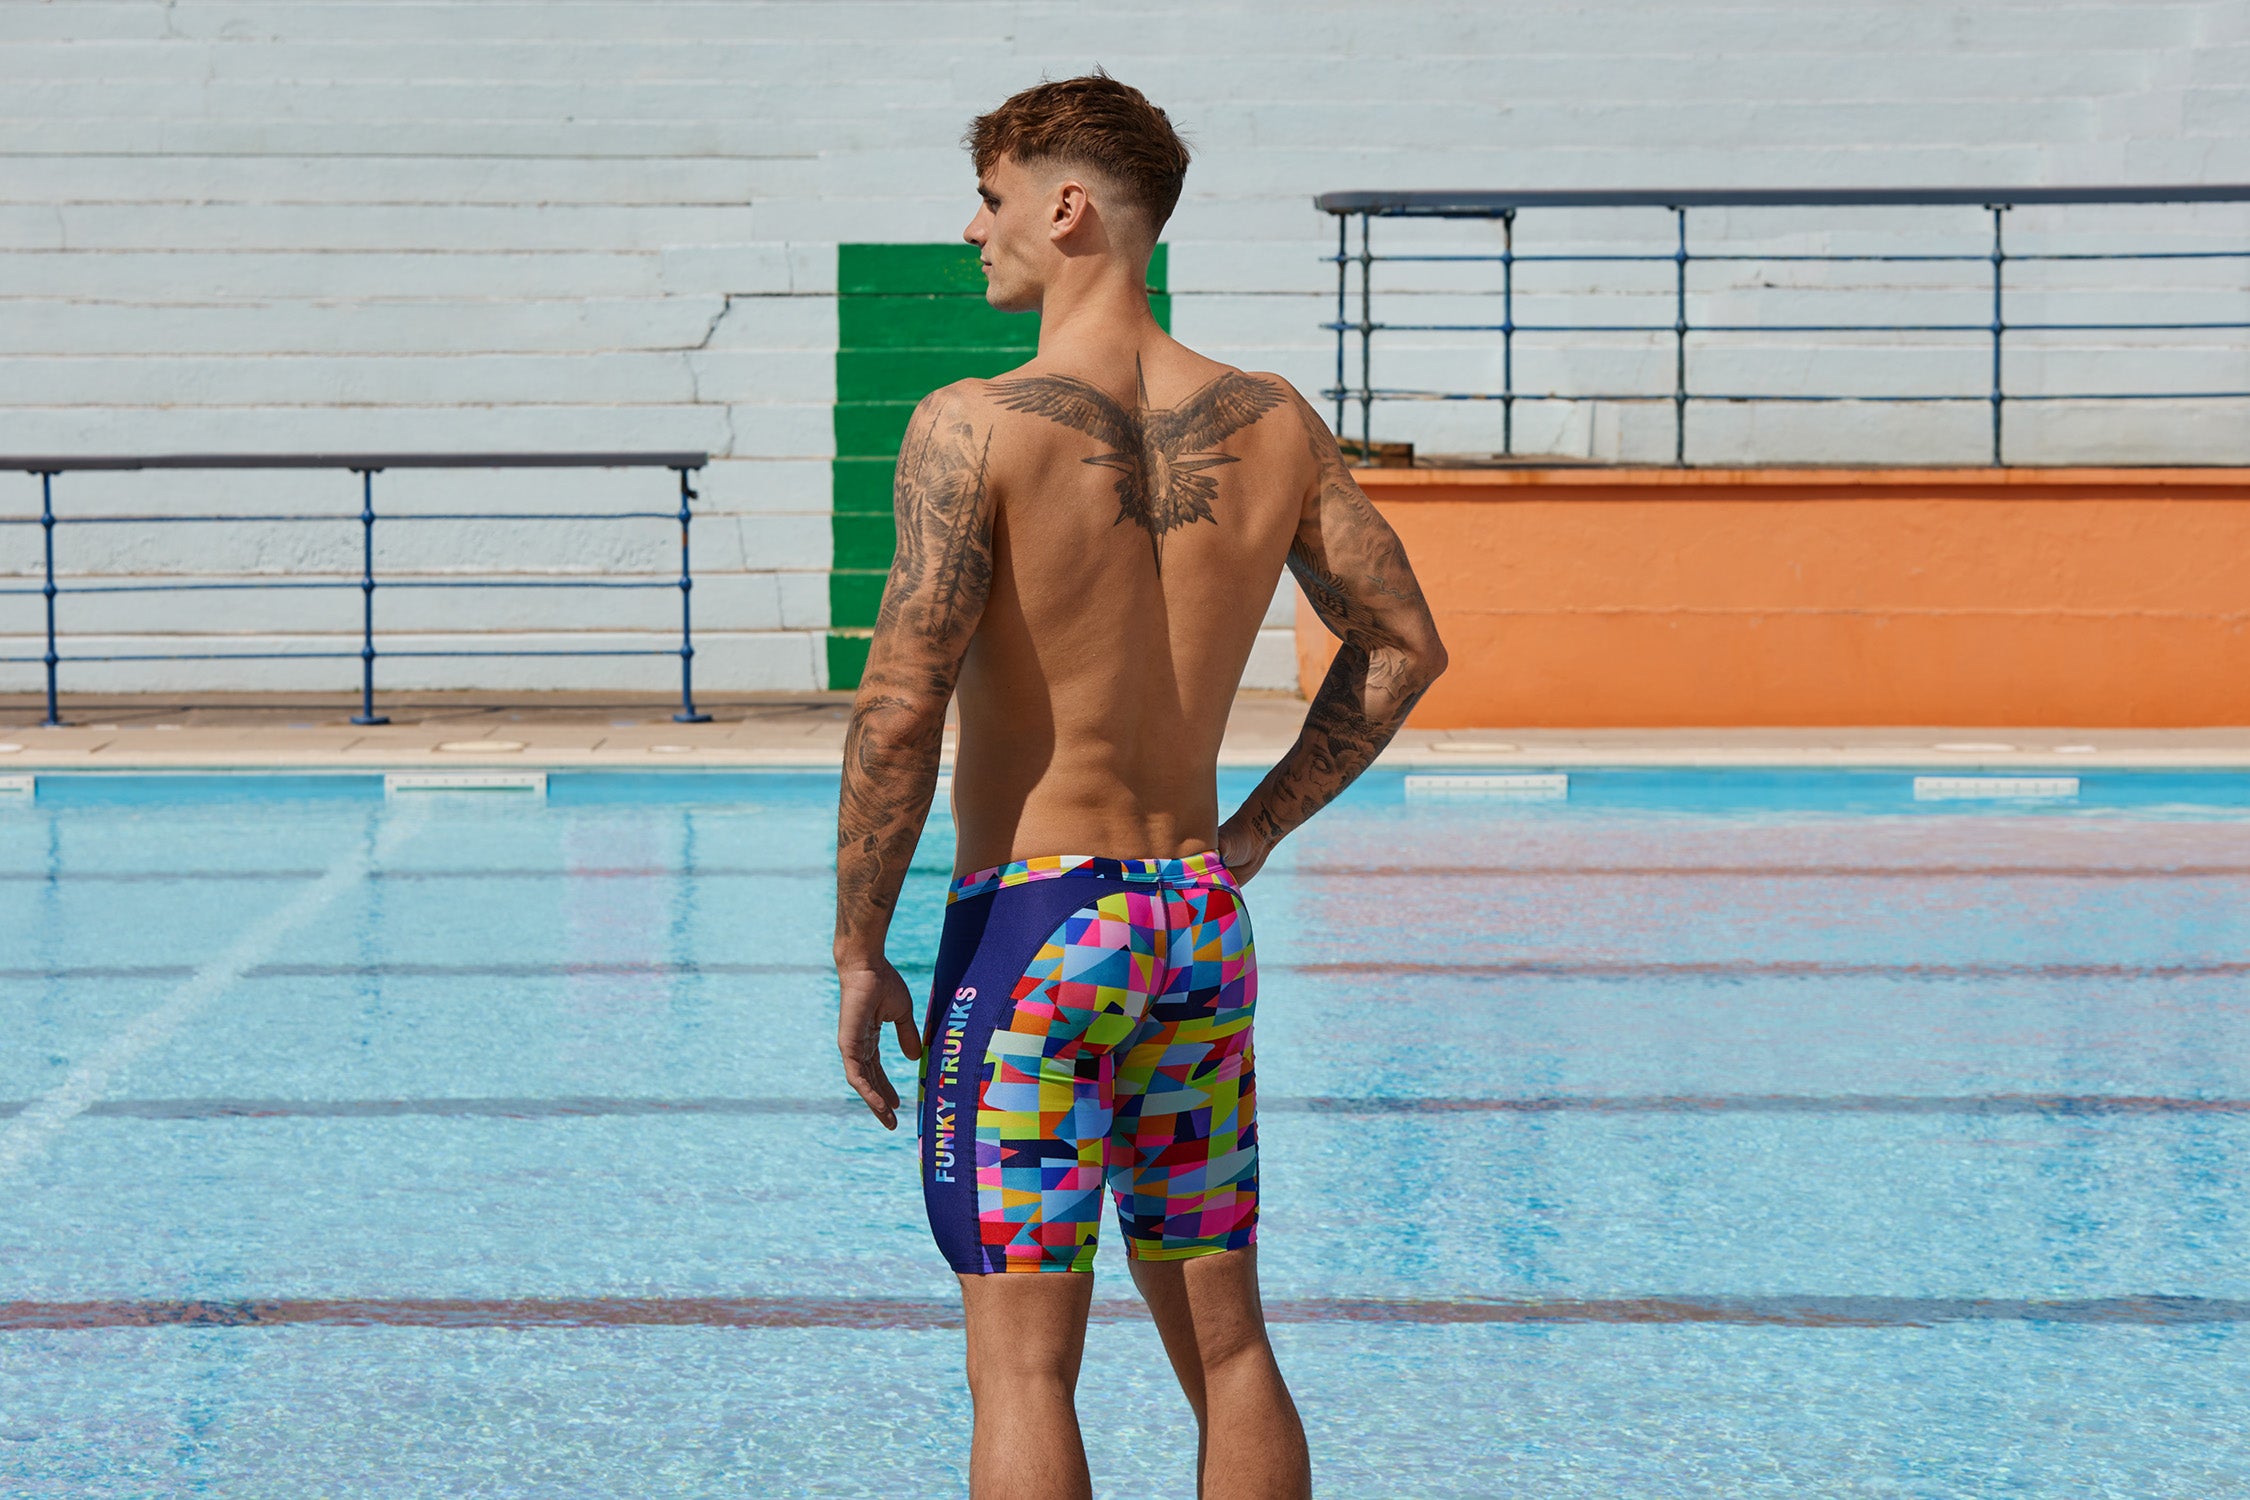 Funky Trunks - On The Grid - Mens Eco Training Jammers